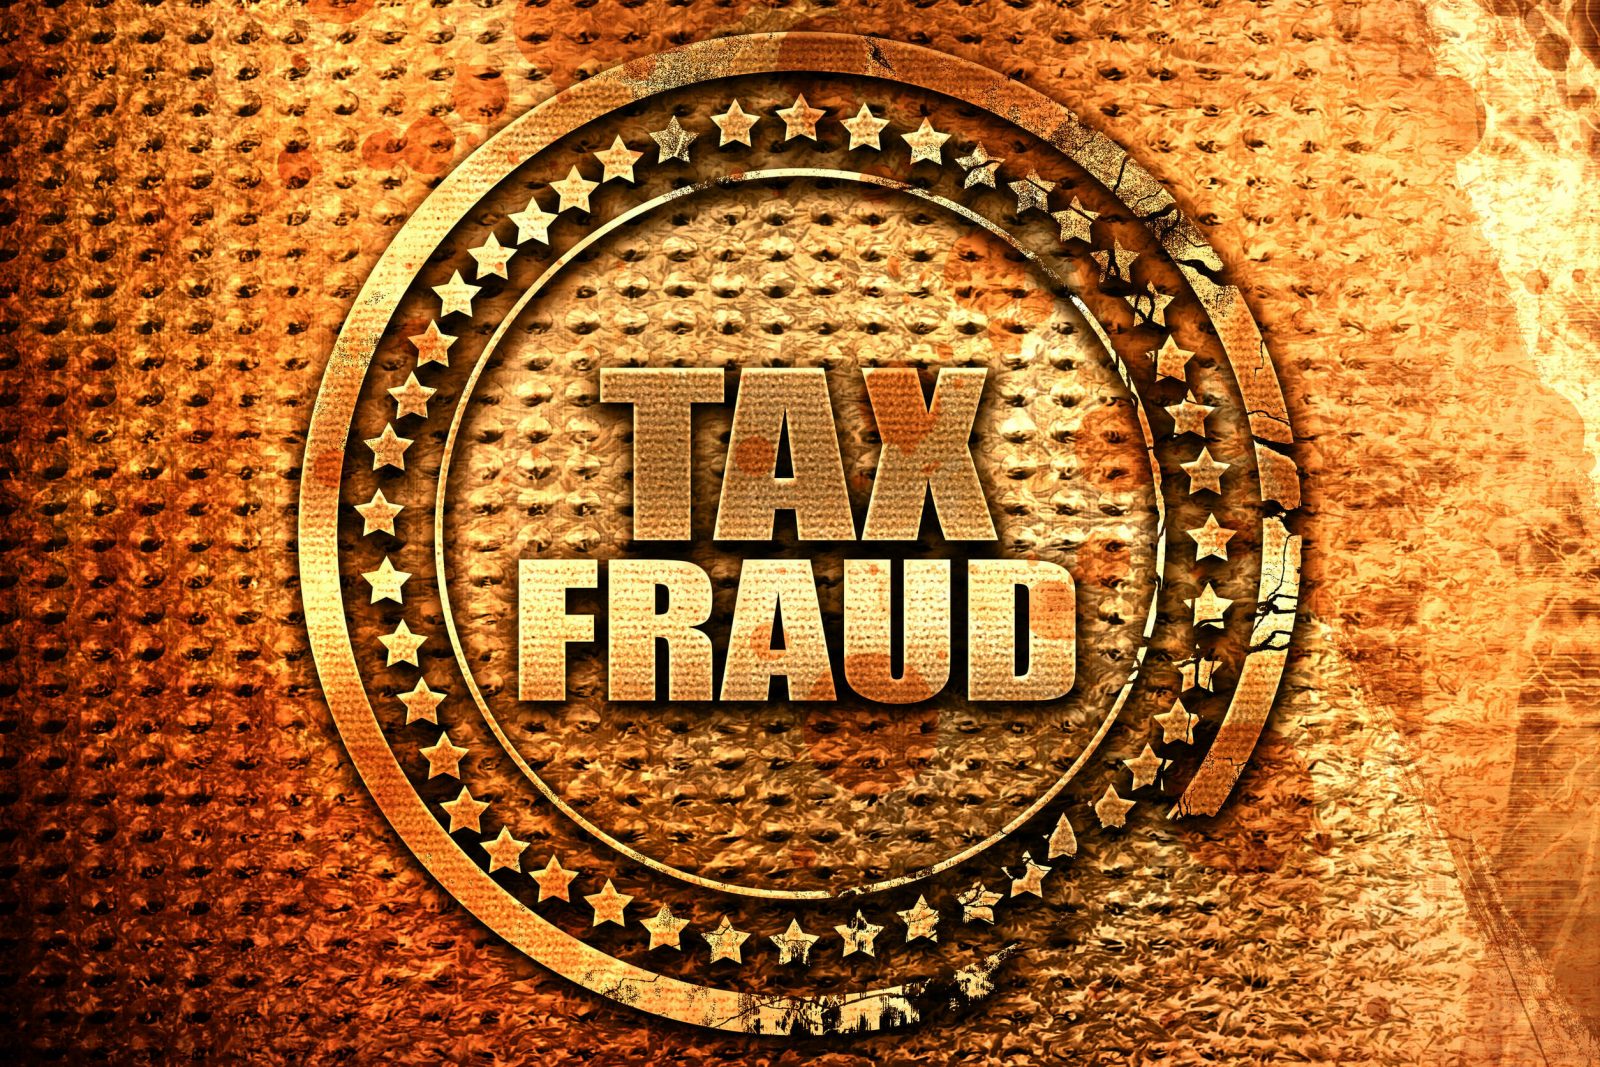 NJ Man Pleads Guilty to Tax Evasion, Failure to File FBAR for Russian Bank Account